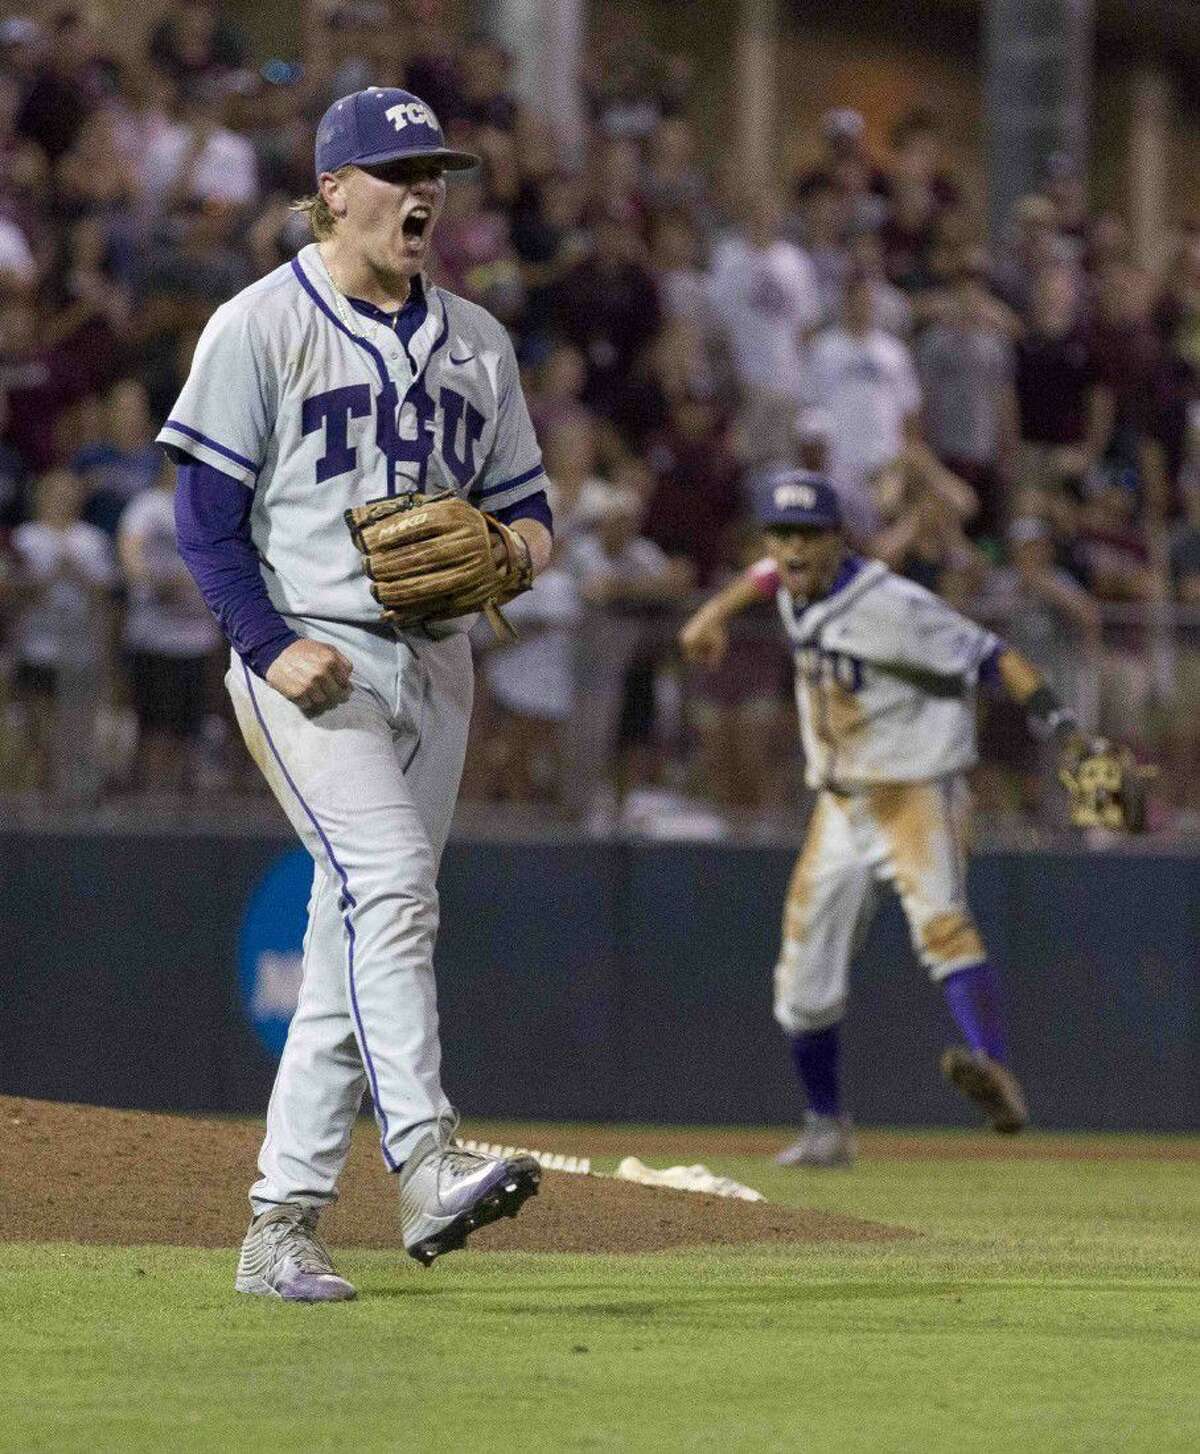 TCU pitcher Durbin Feltman, former Oak Ridge player, celebrates after a stikeout in the ninth inning of a NCAA college baseball super regional tournament game Sunday, June 12, 2016, in College Station, Texas.